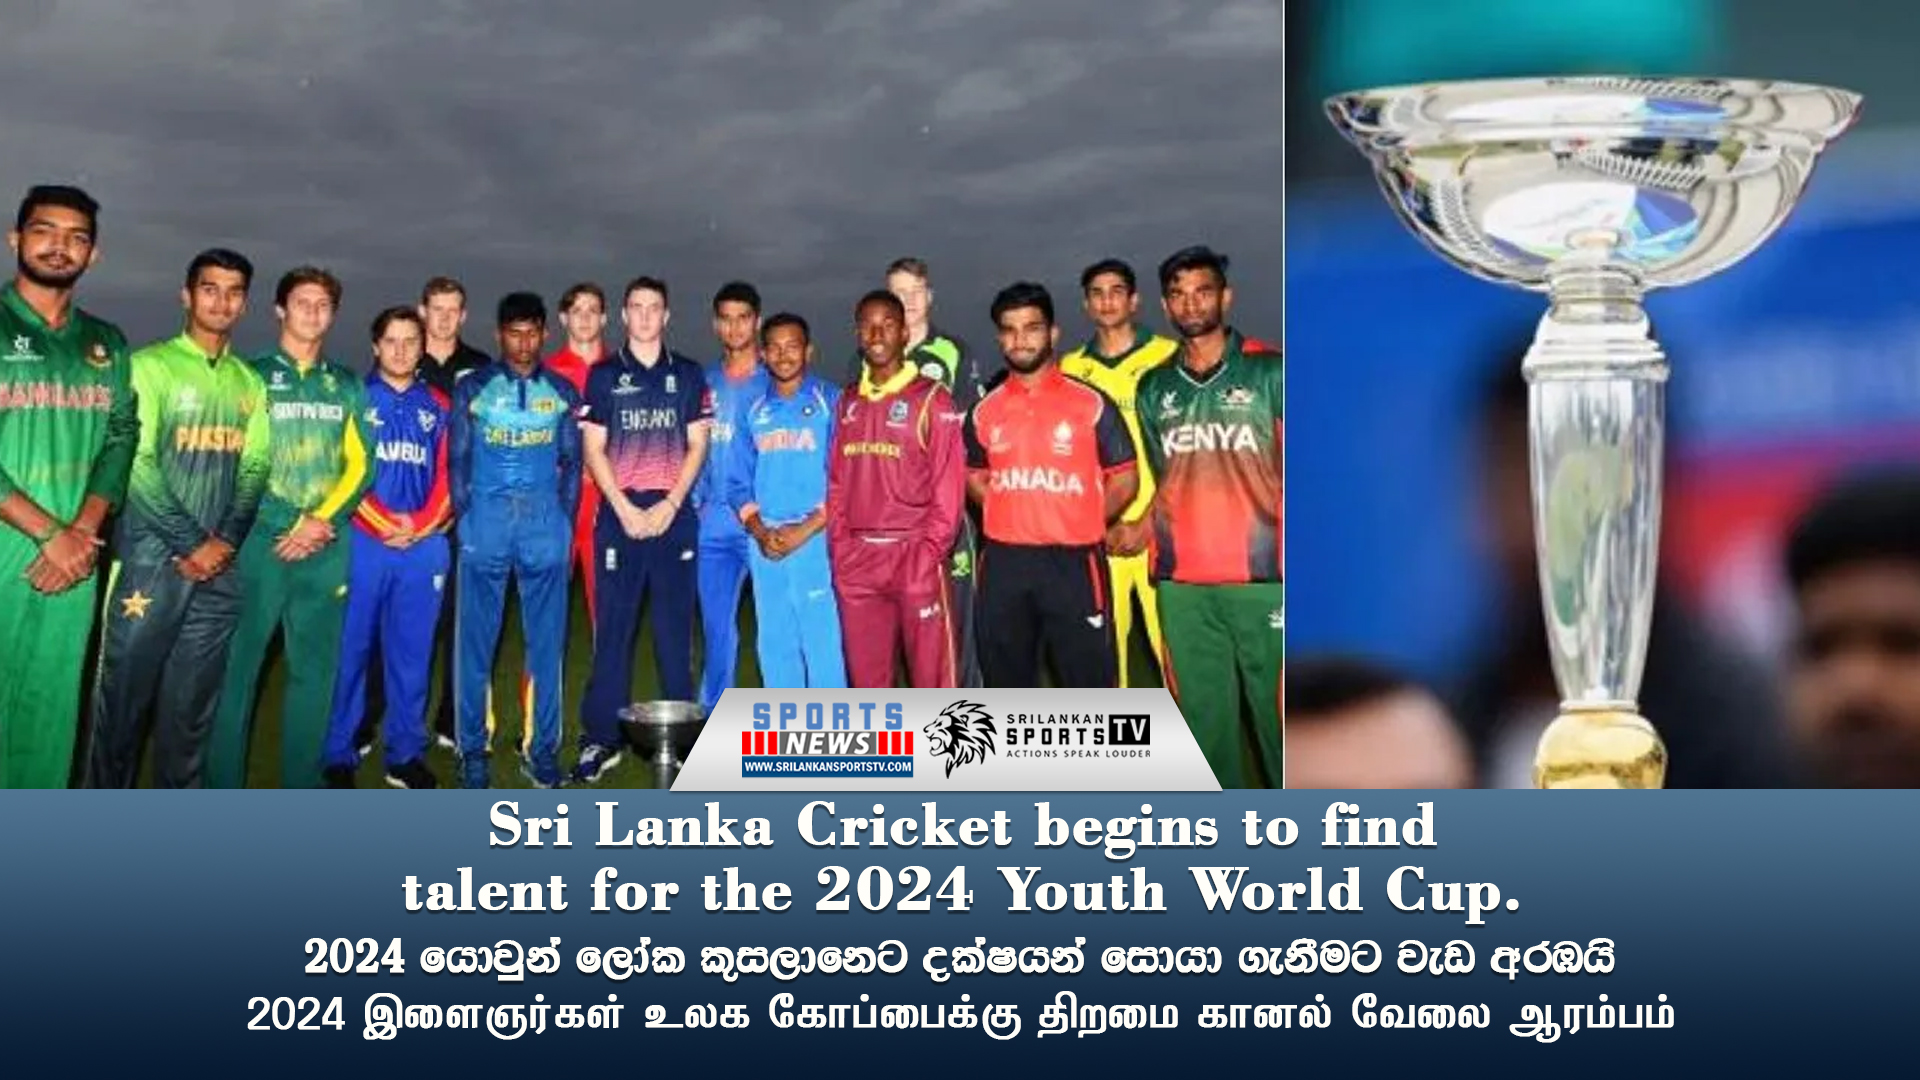 Sri Lanka Cricket begins to find talent for the 2024 Youth World Cup!!!